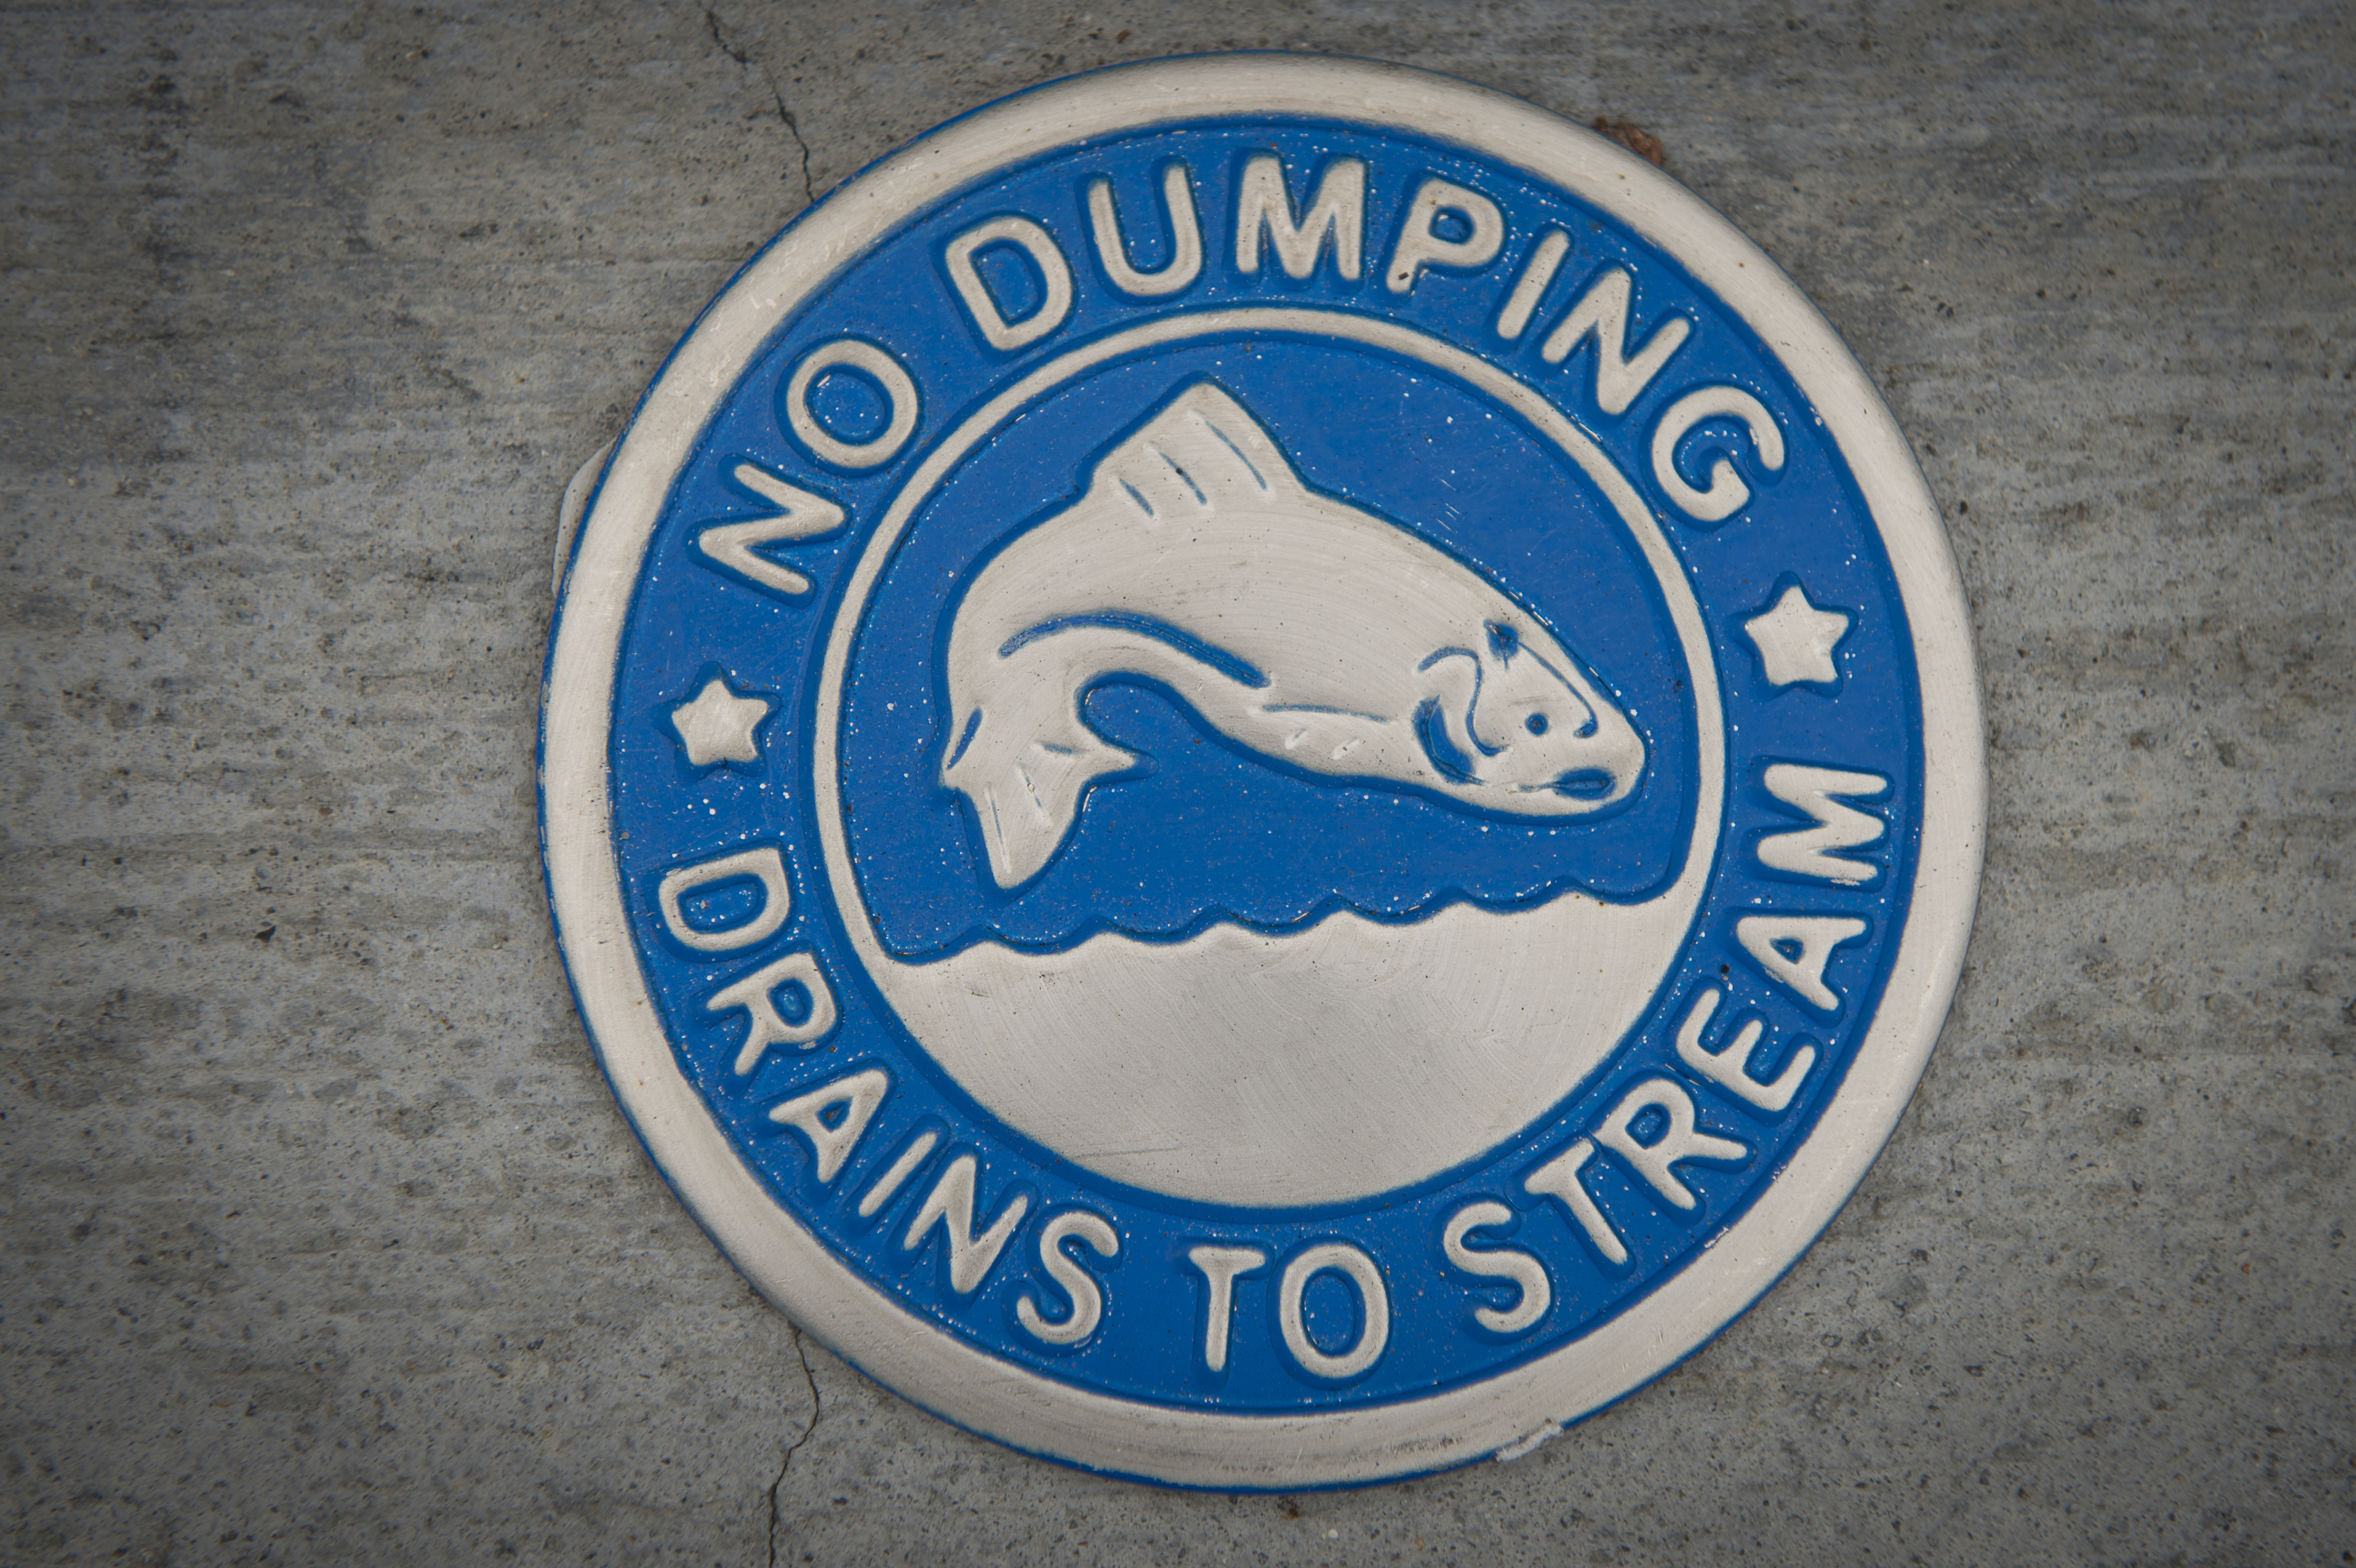 No Dumping - Drains to Stream Picture